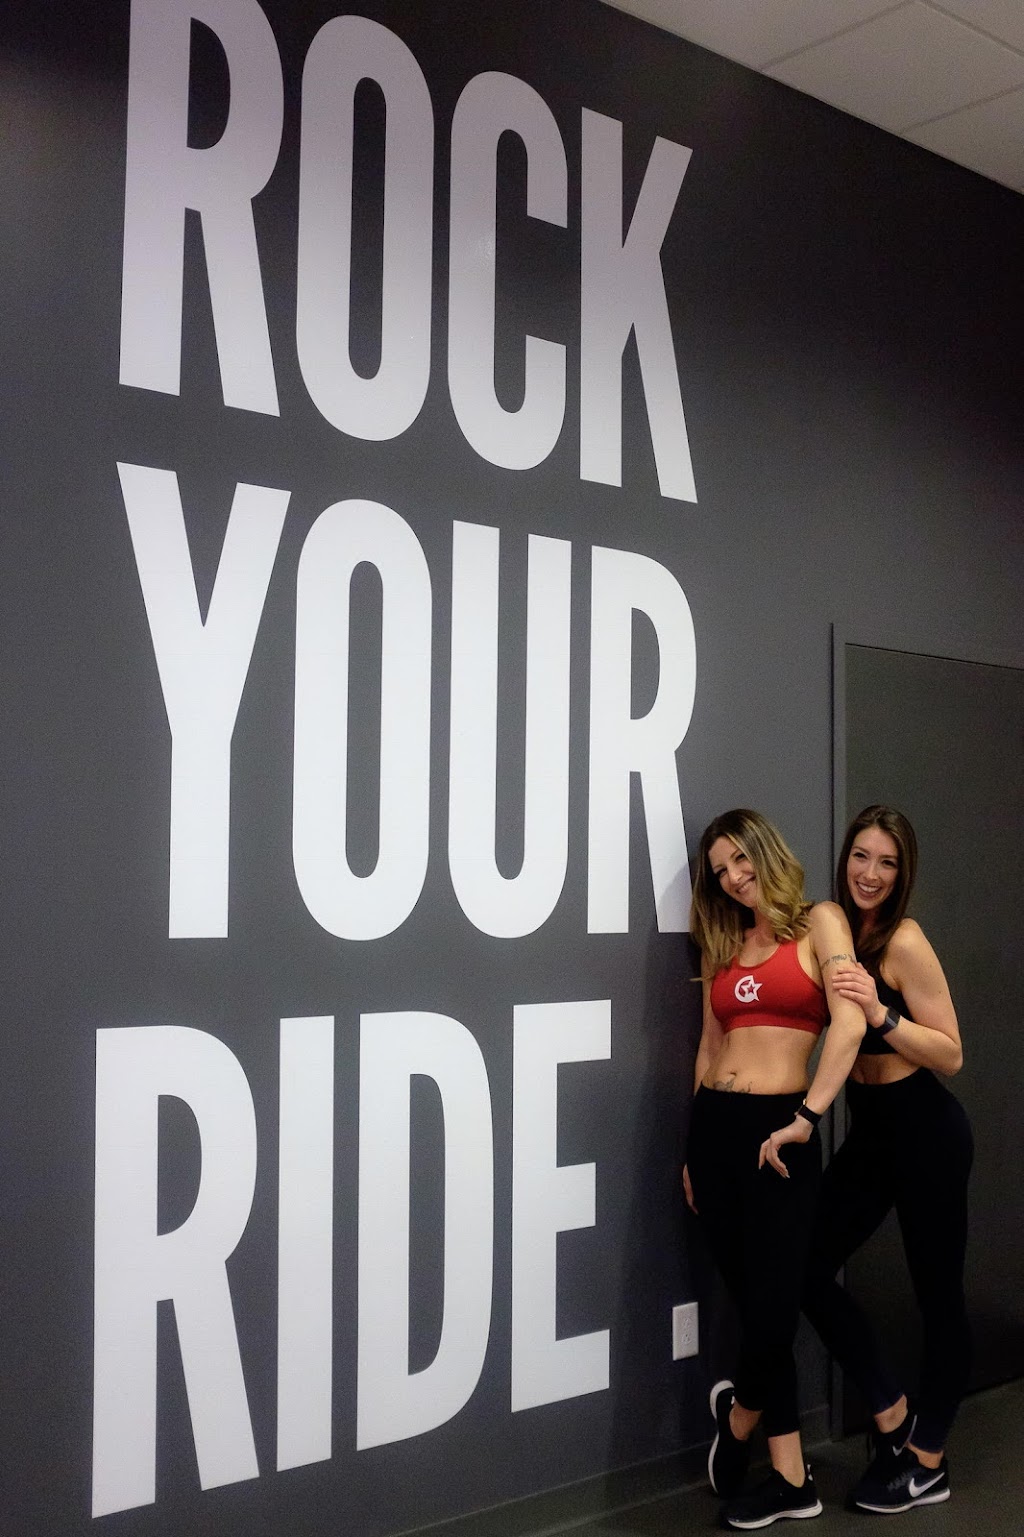 CYCLEBAR | 500 W Germantown Pike Suite 1530, Plymouth Meeting, PA 19462 | Phone: (267) 551-4421